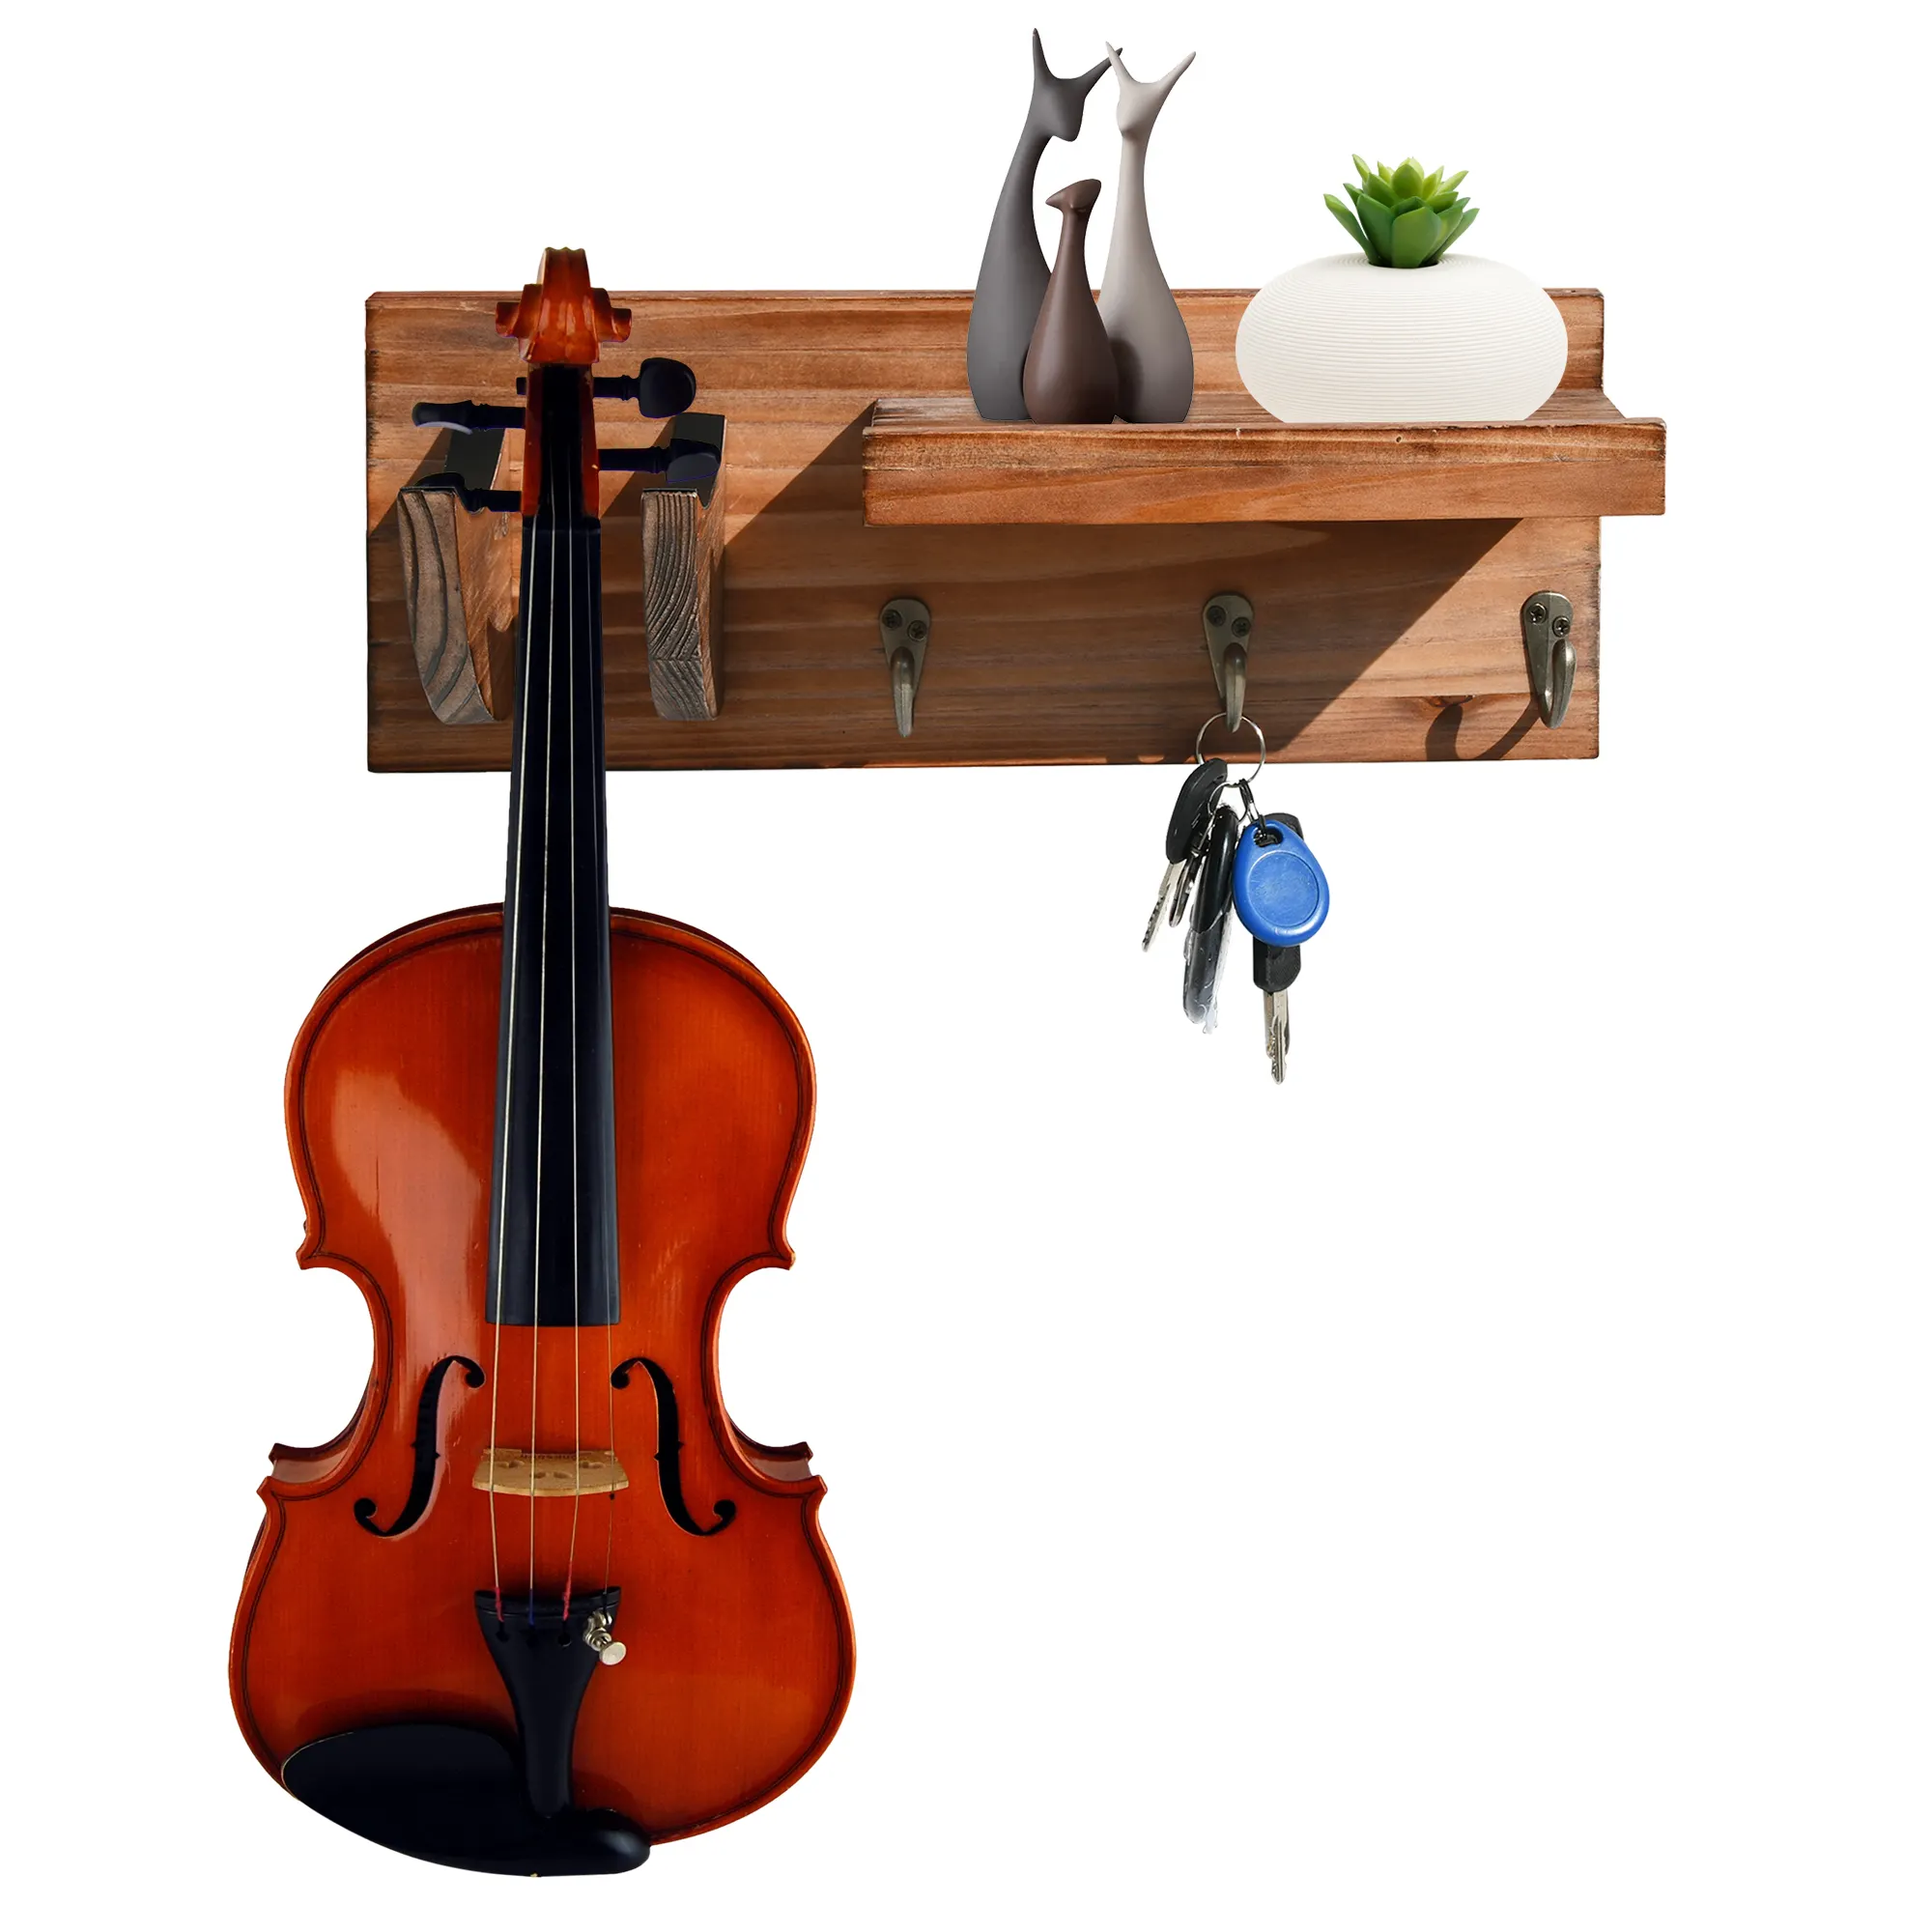 Wall Mount Guitar Holder for All Size Guitar, Wood Guitar Hanger Wall Mount with Shelf and Pick Hooks